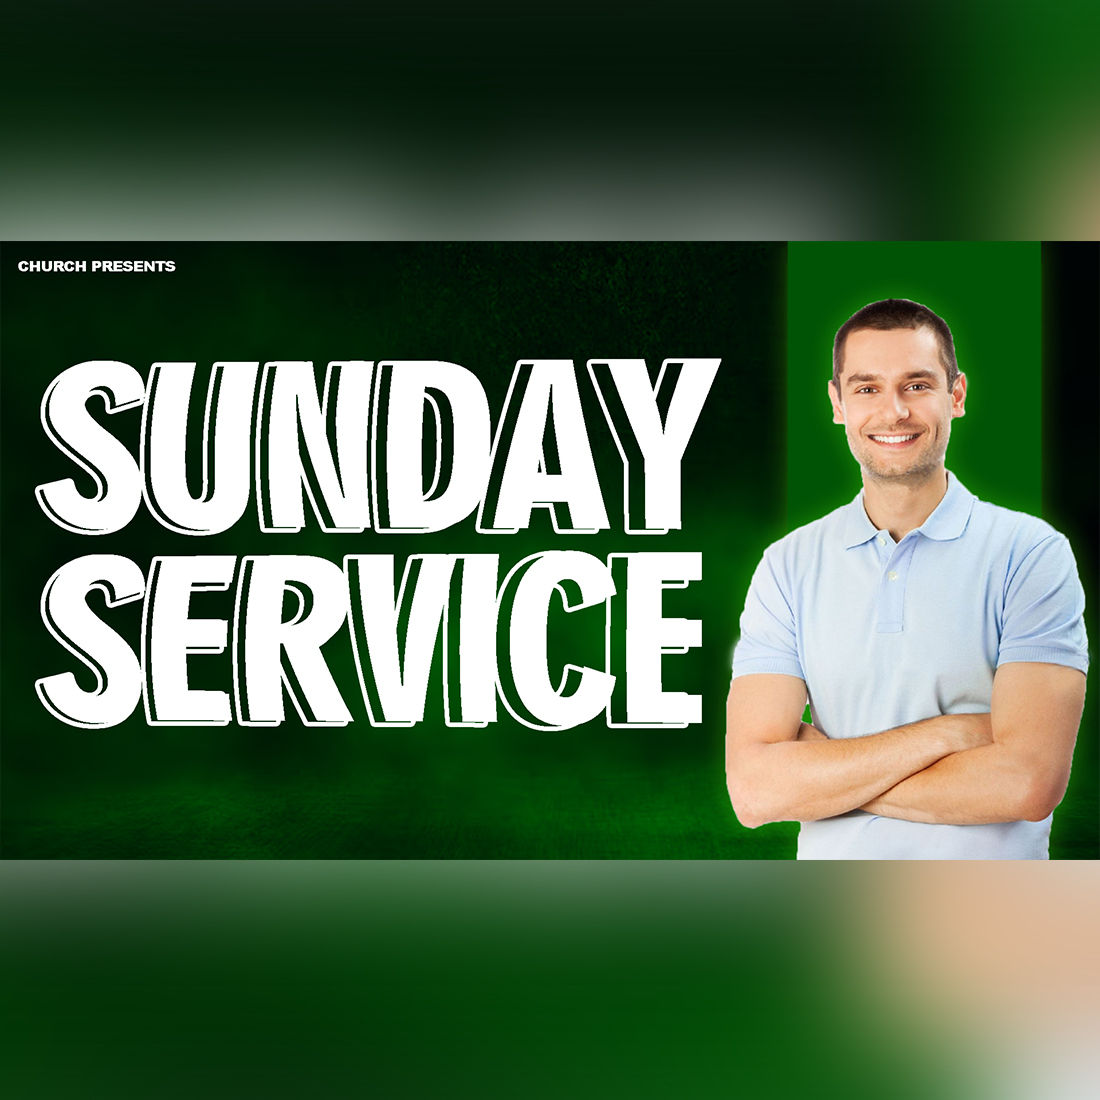 SUNDAY SERVICE THUMBNAIL preview image.